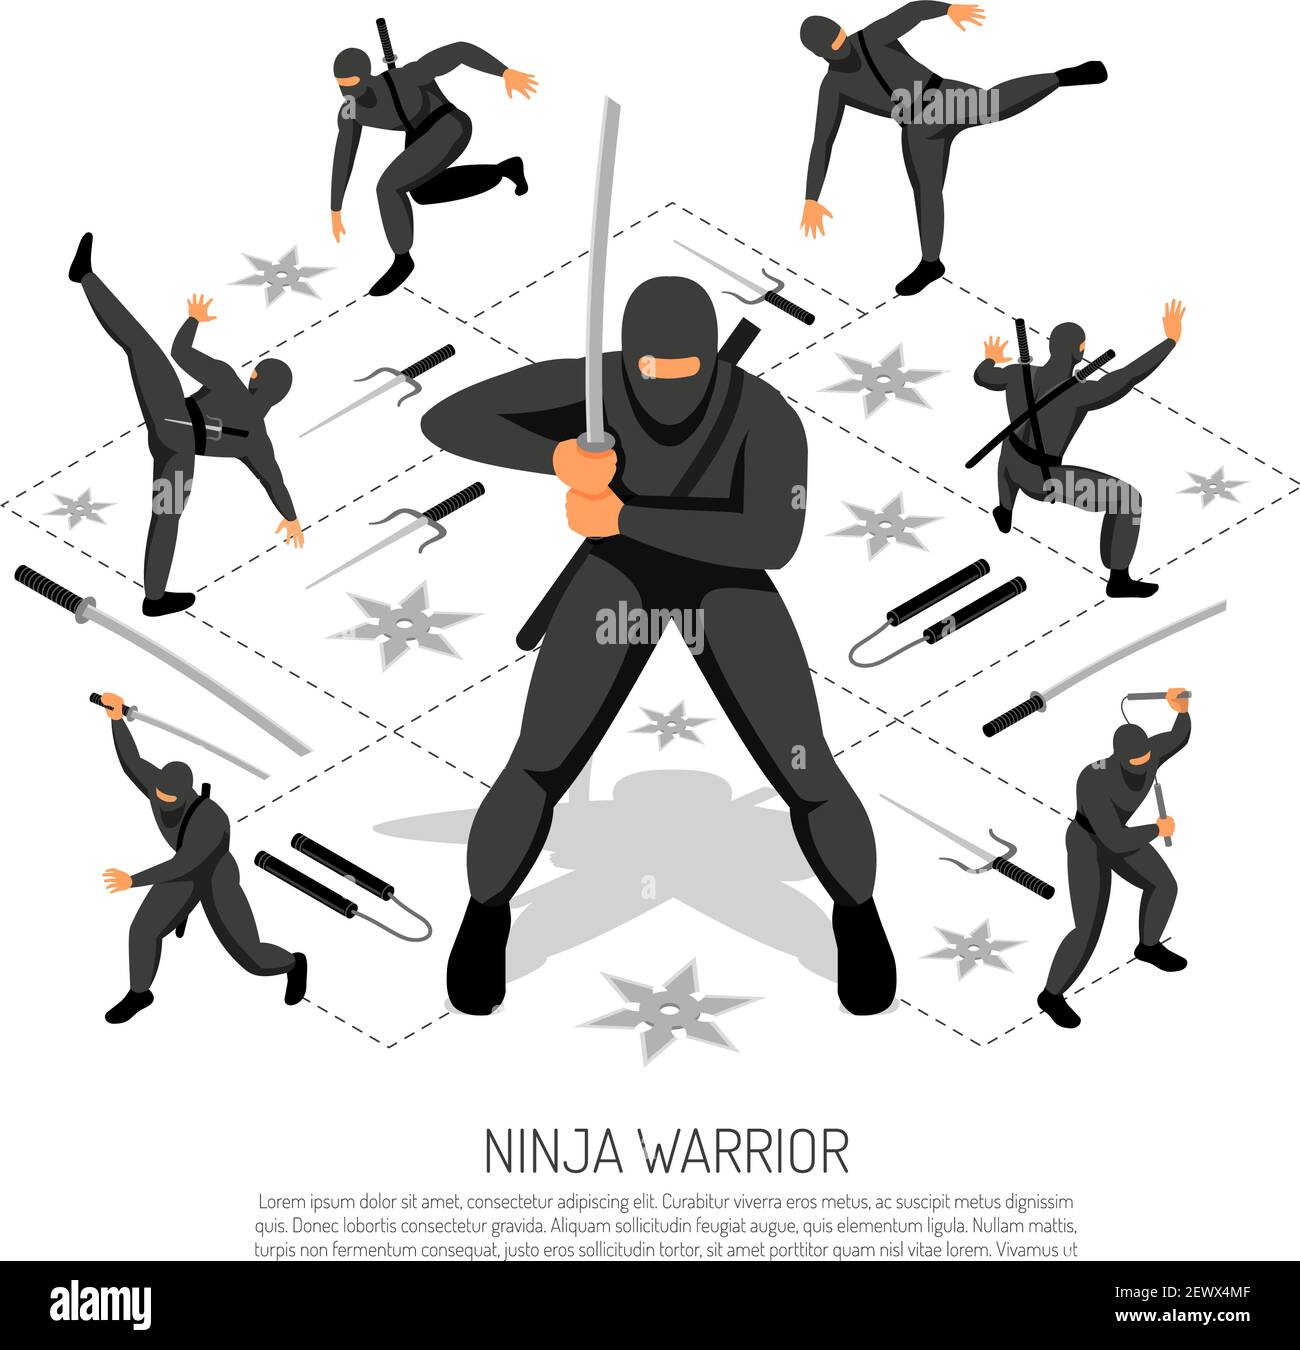 Ninja warrior unbeatable stickman character in various action poses isometric interactive video game advertisement poster vector illustration Stock Vector